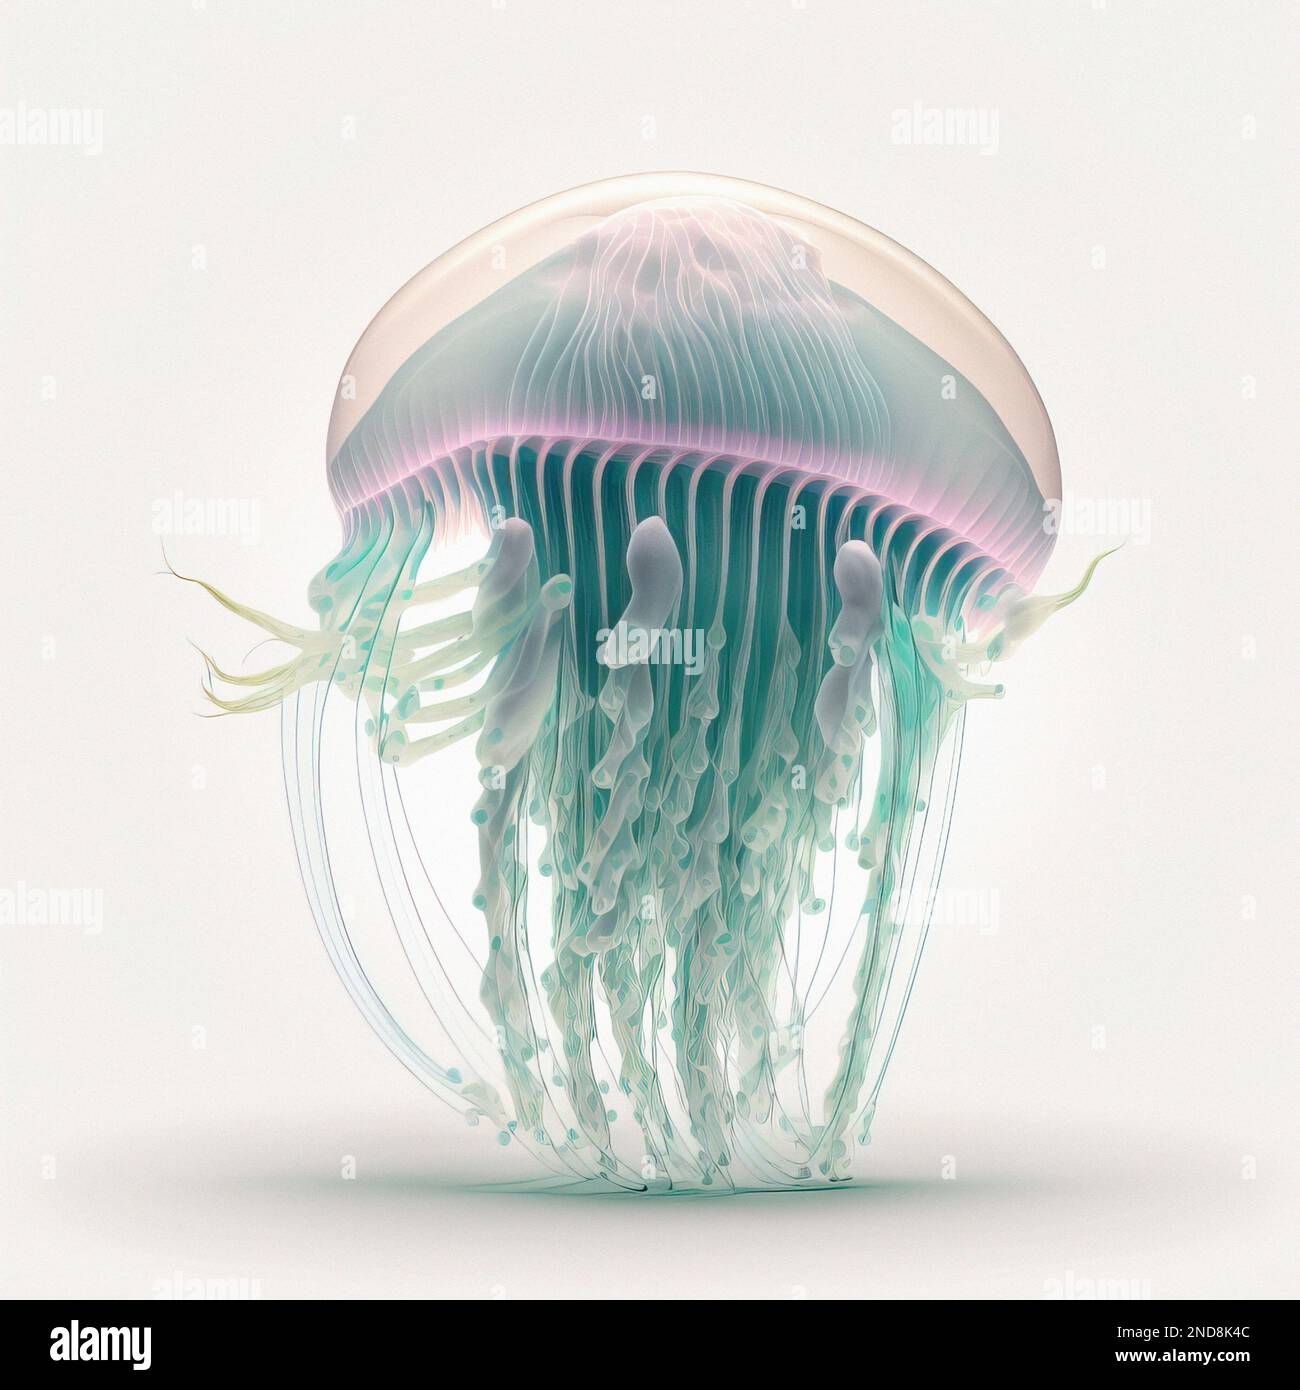 Jellyfish isolated on white background, 3D illustration. Download image Stock Photo